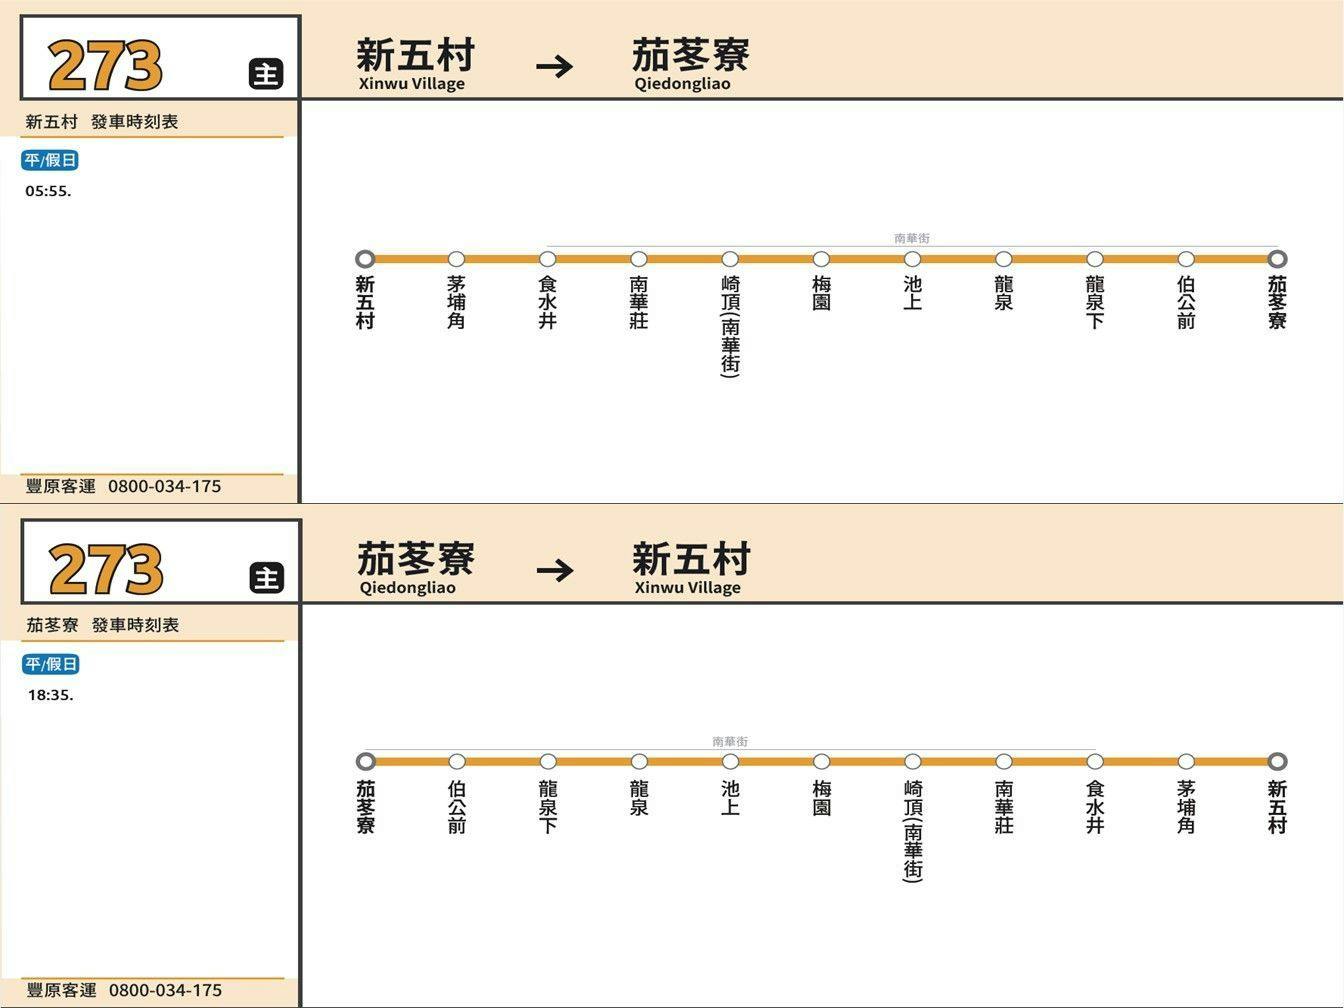 273Route Map-台中 Bus